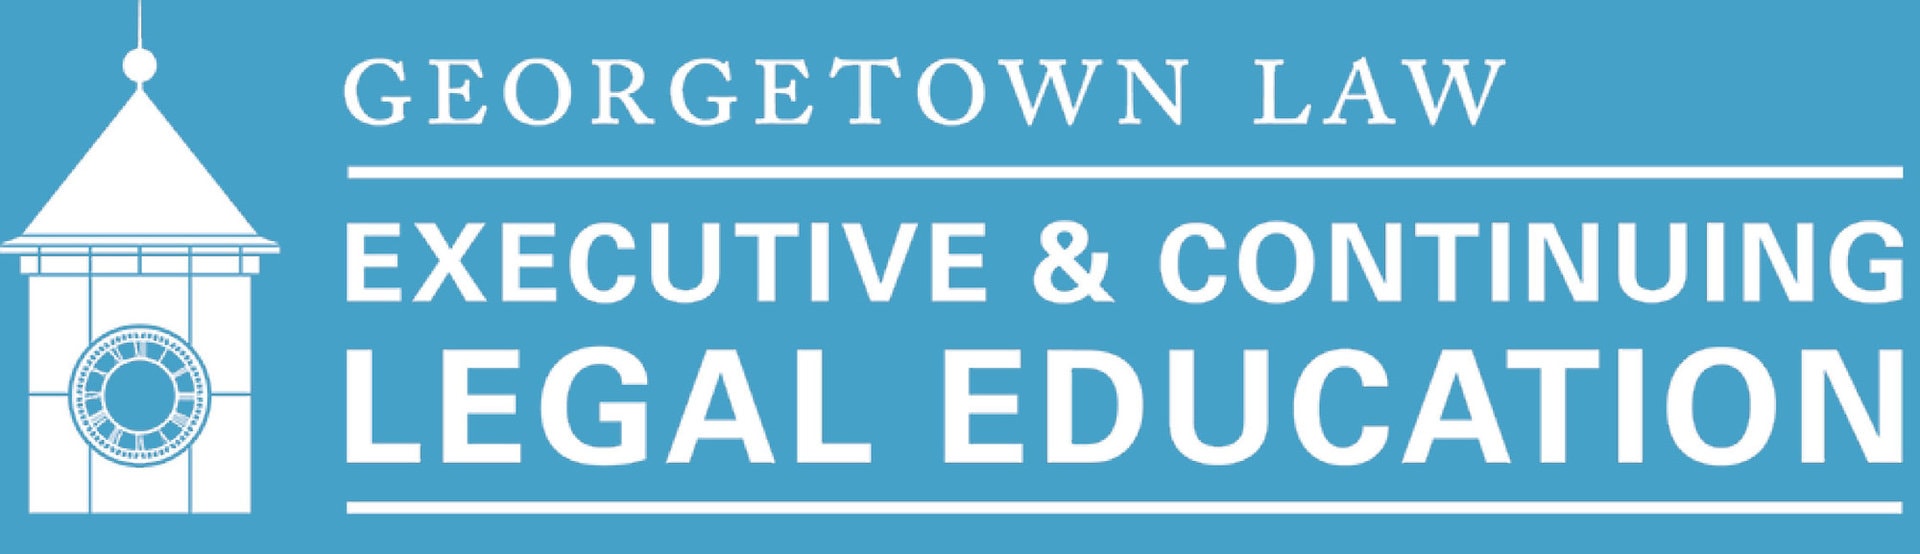 Georgetown Law 2020 Global Advanced eDiscovery Institute